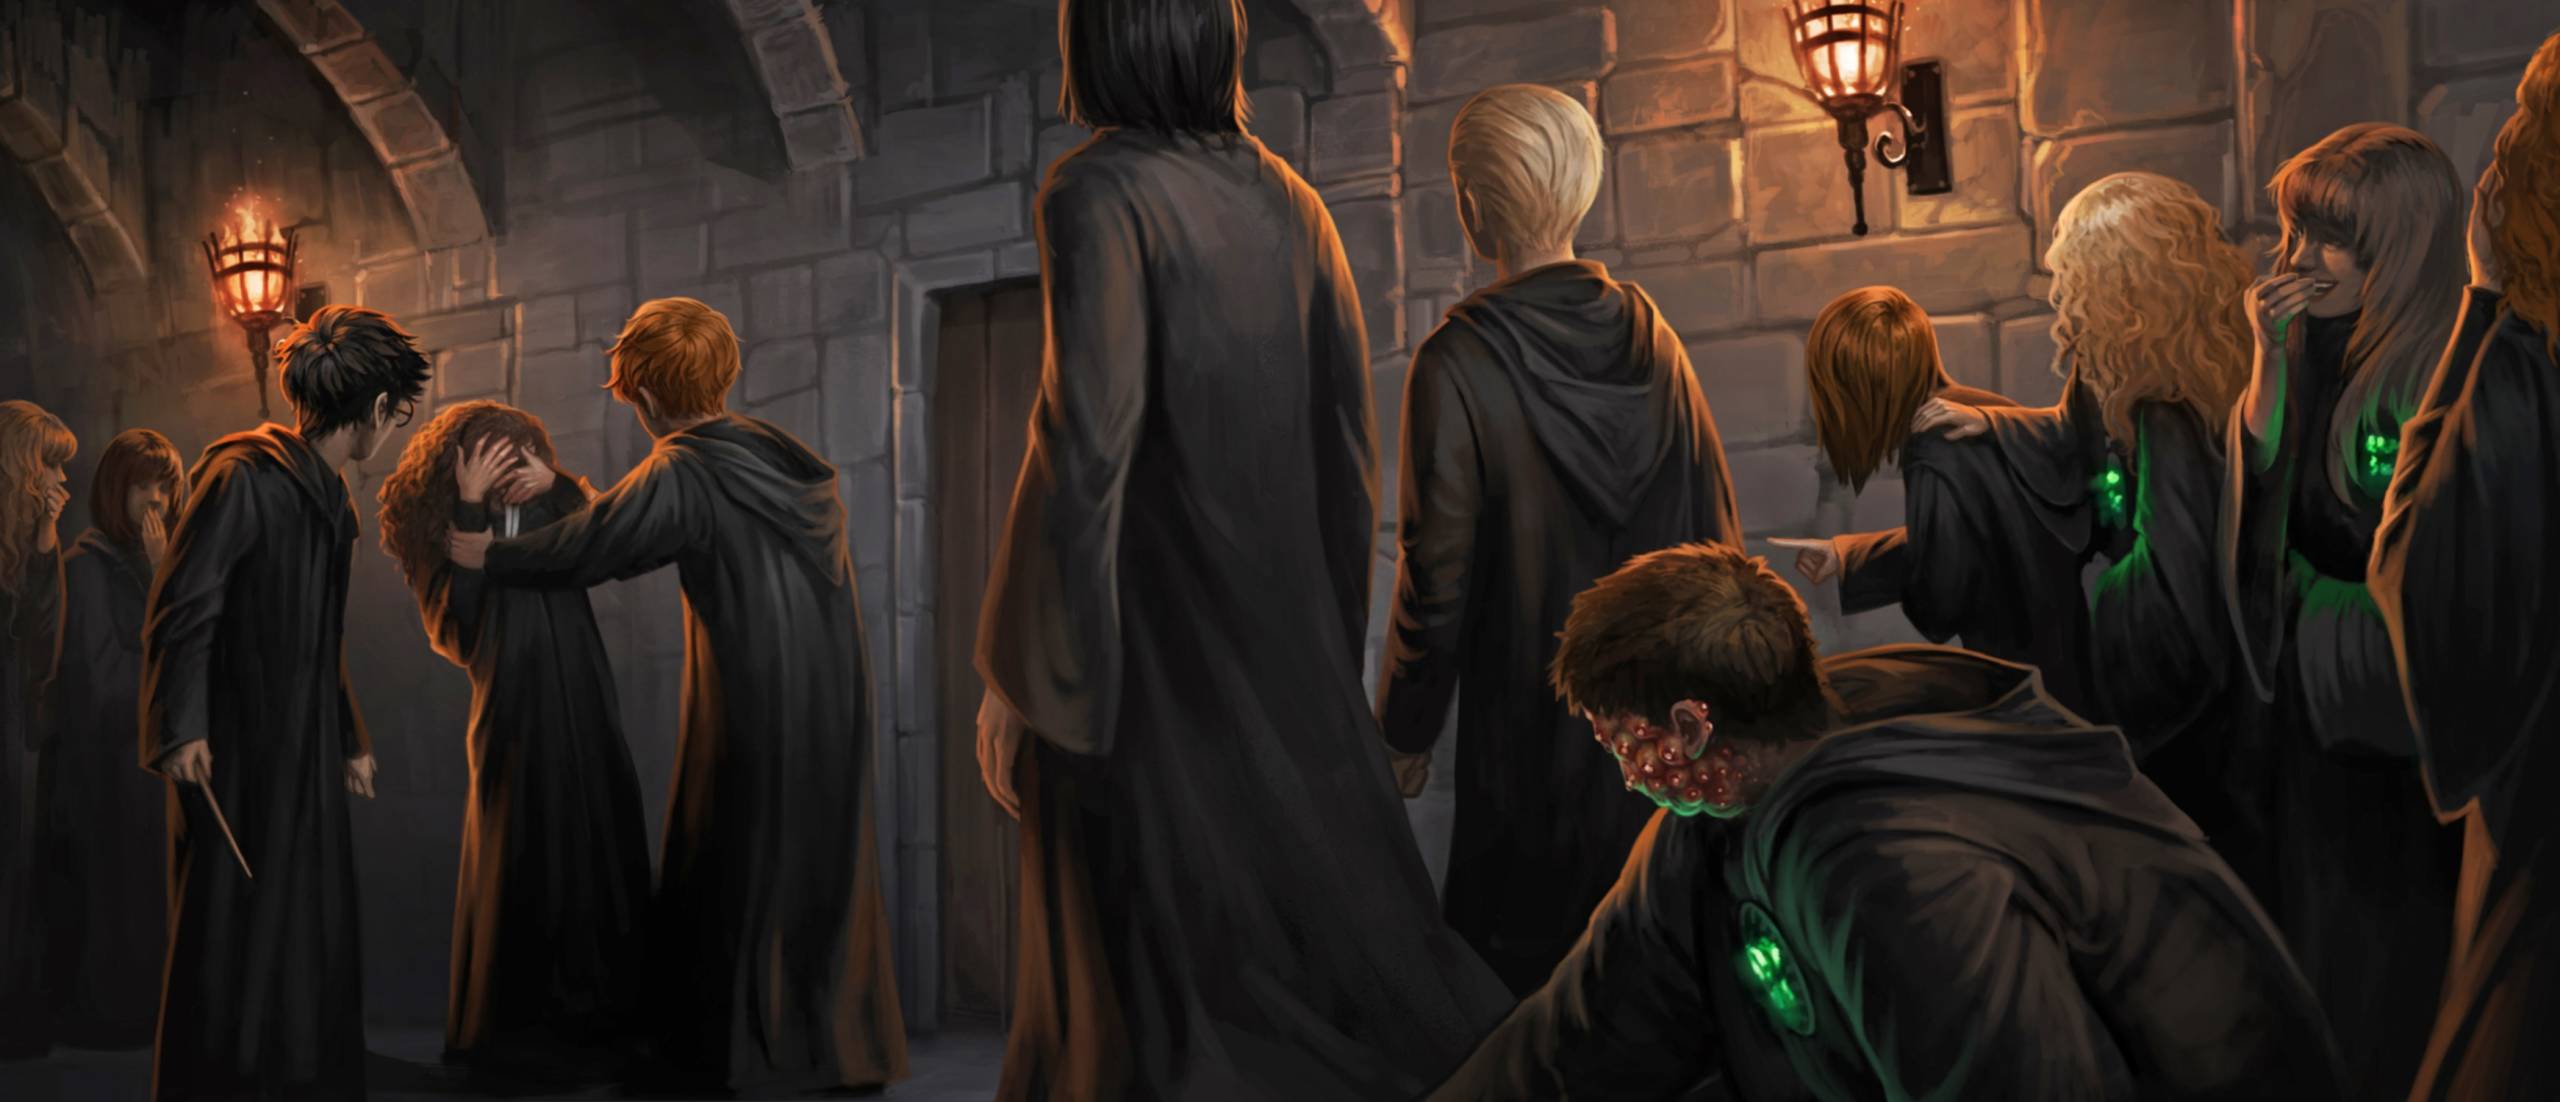 After Draco curses Hermione's teeth, Harry aims a pimple jinx at Malfoy, but it deflects onto Goyle.